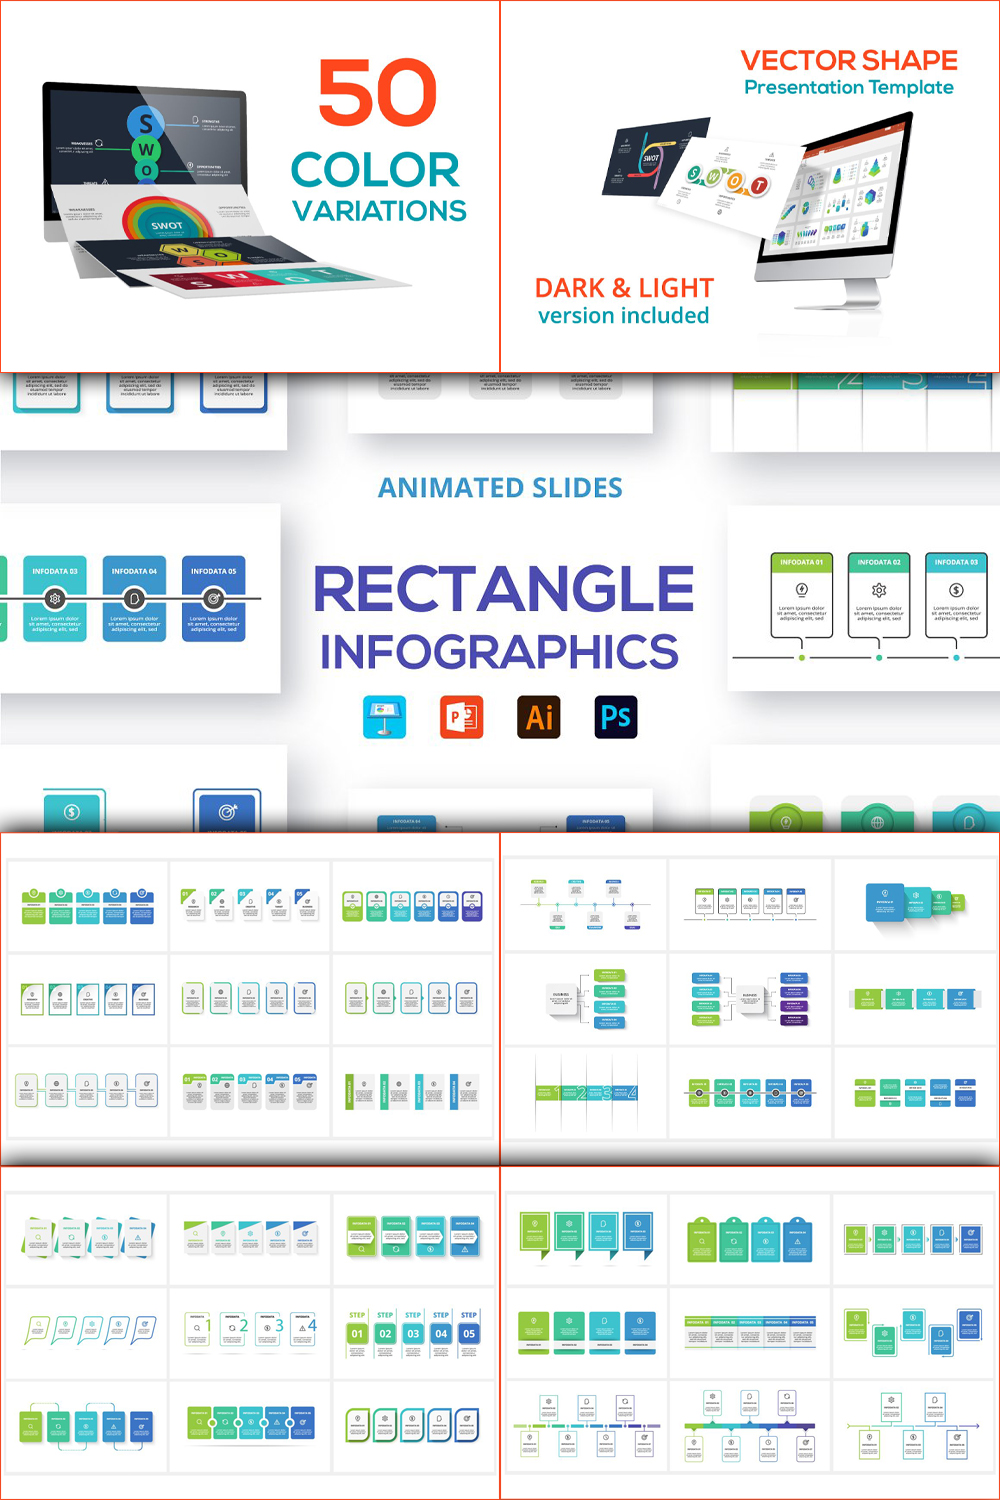 Rectangles animated infographics of pinterest.